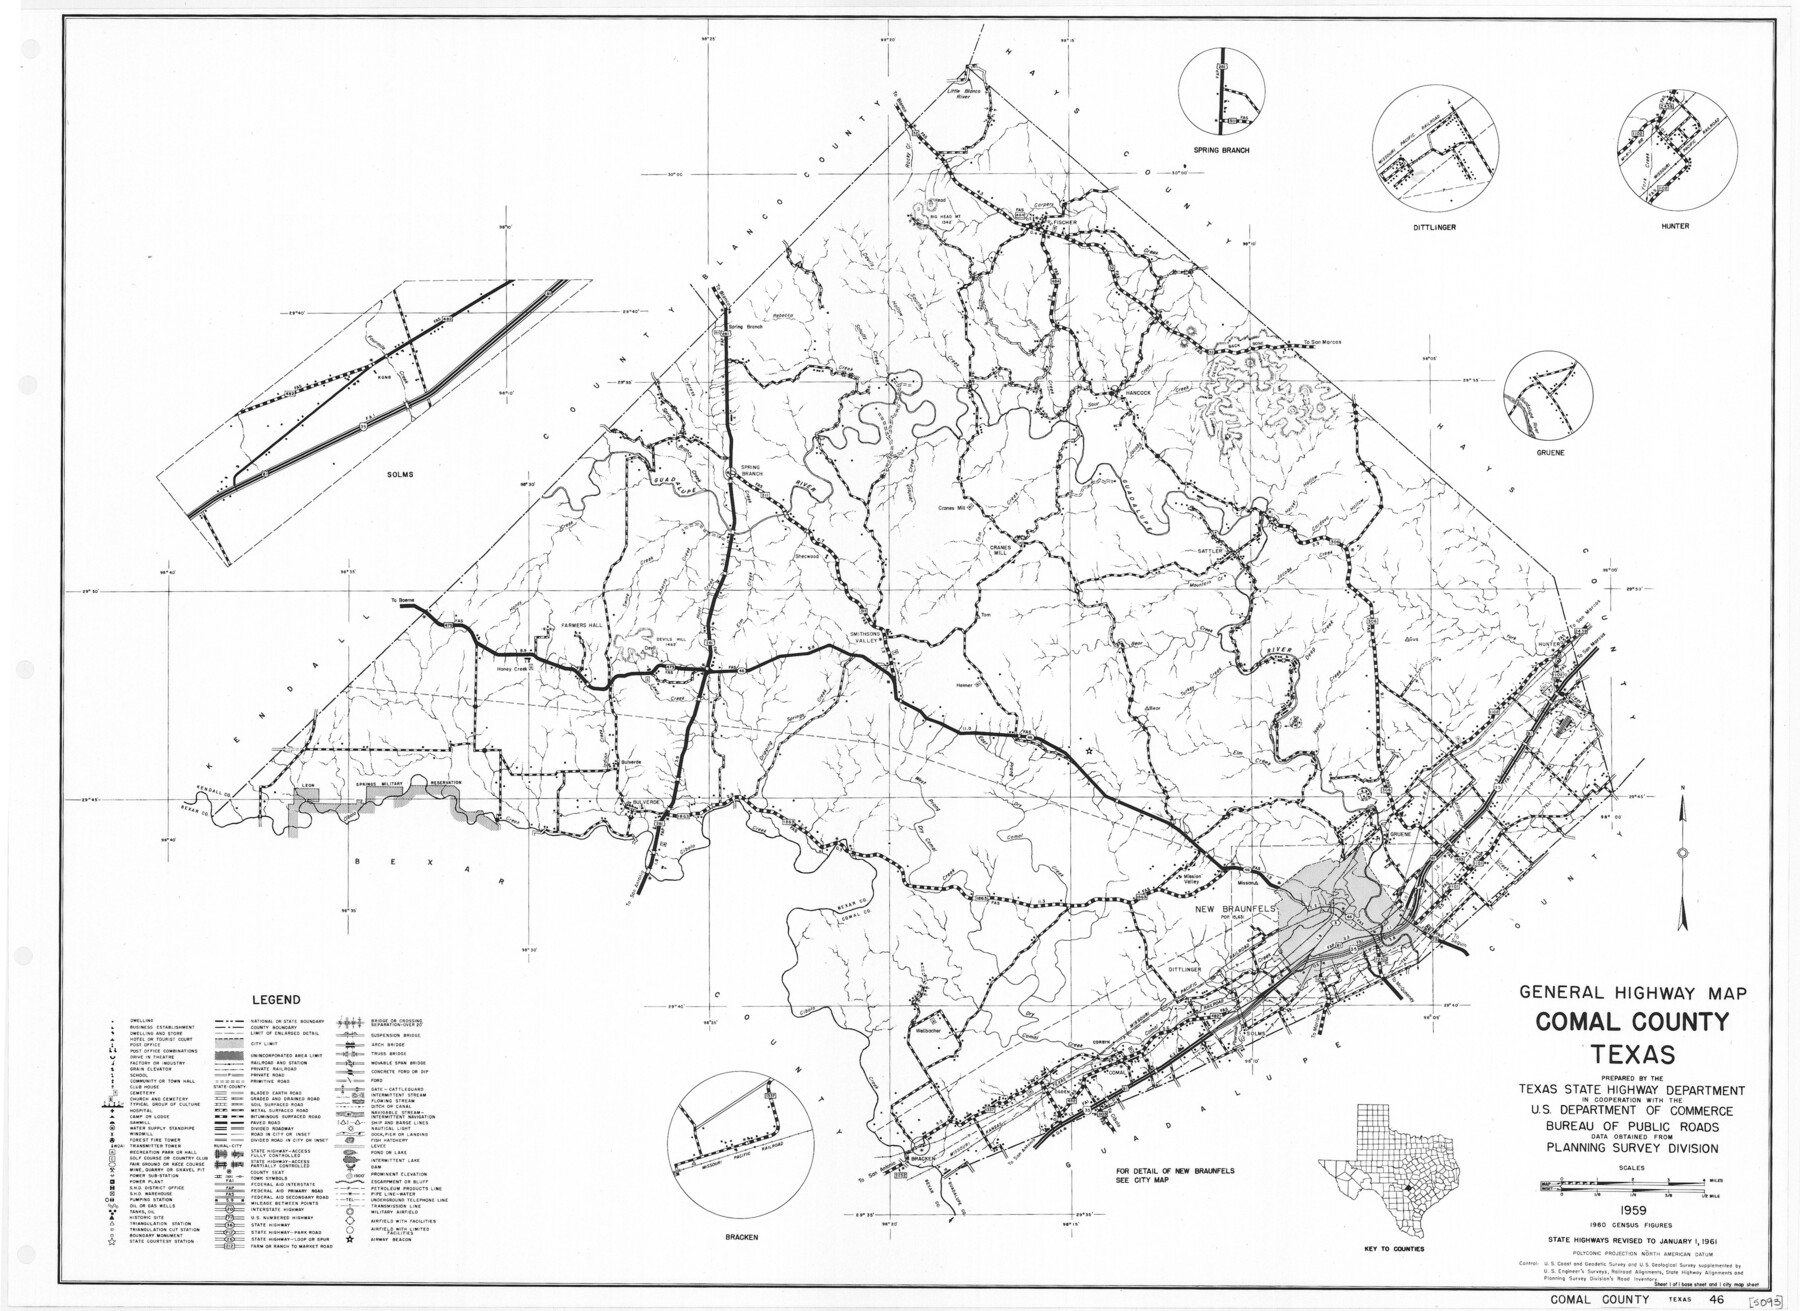 79417, General Highway Map, Comal County, Texas, Texas State Library and Archives